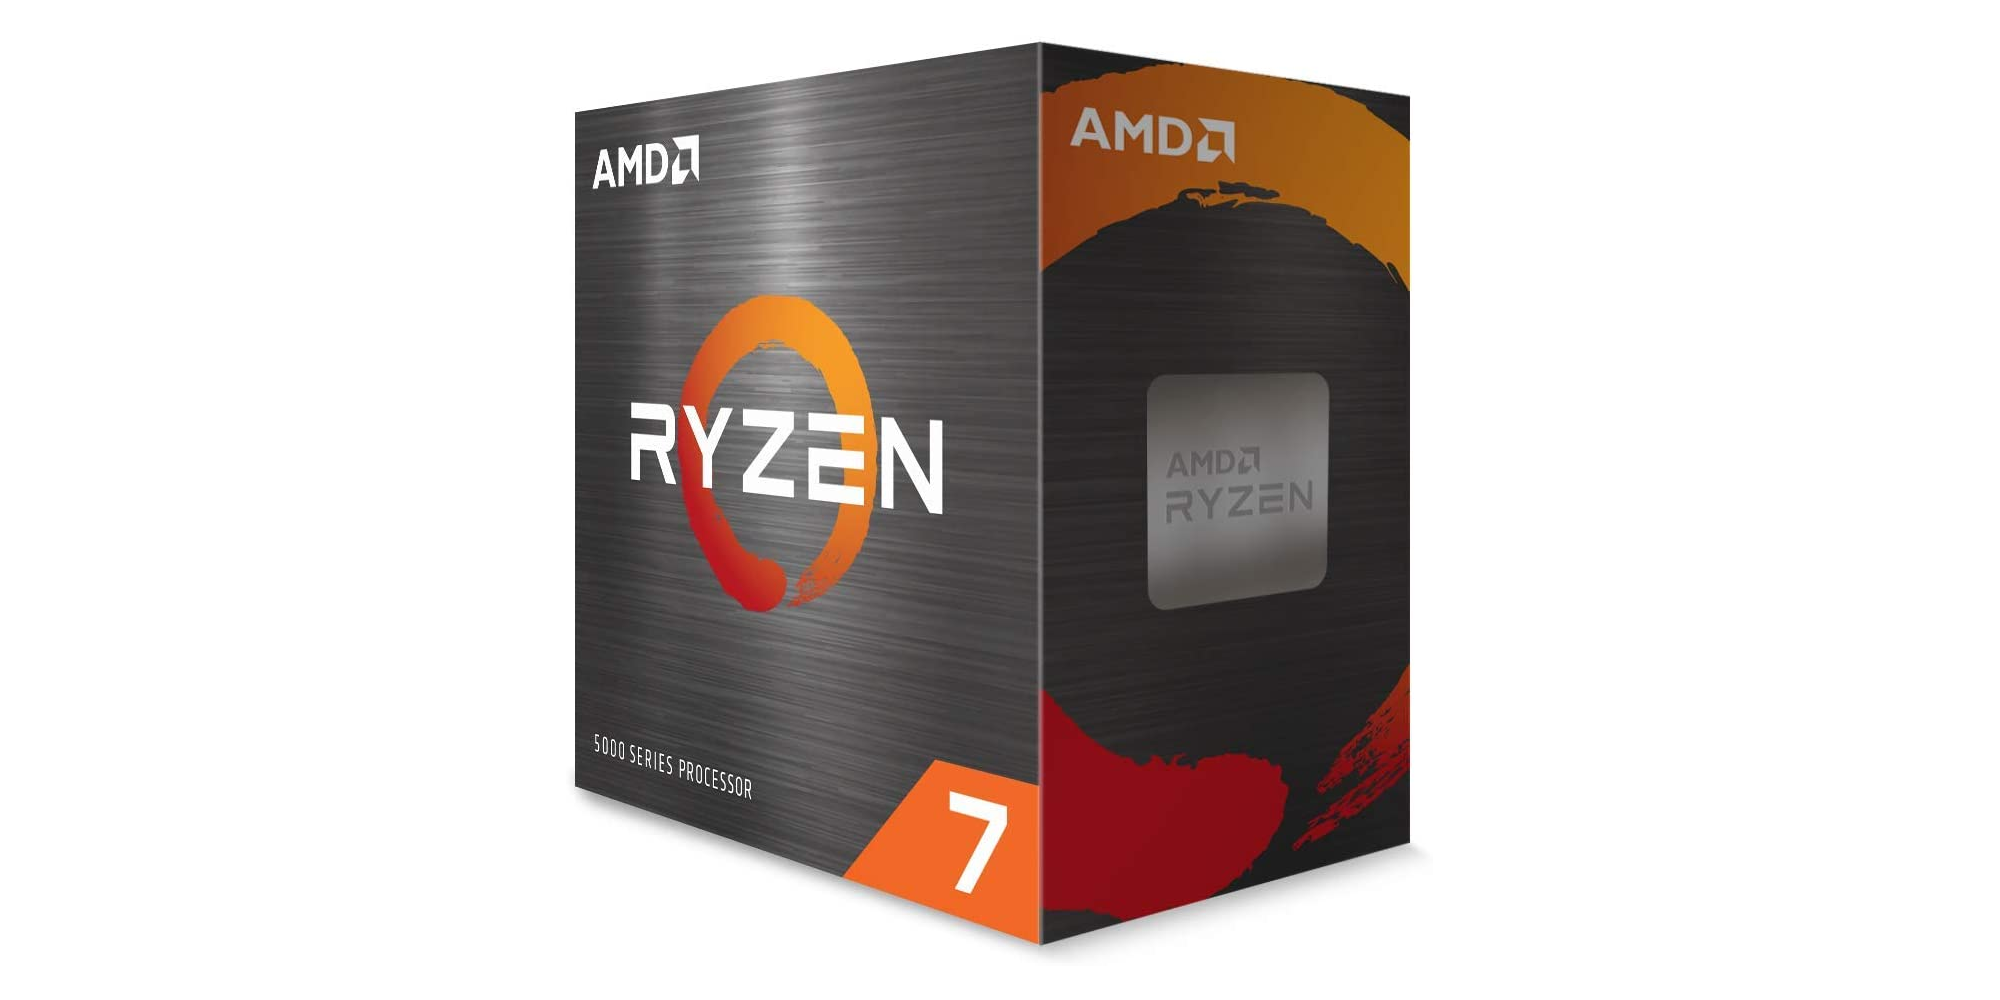 AMD's Ryzen 7 5800X is perfect for your gaming rig at new low of 